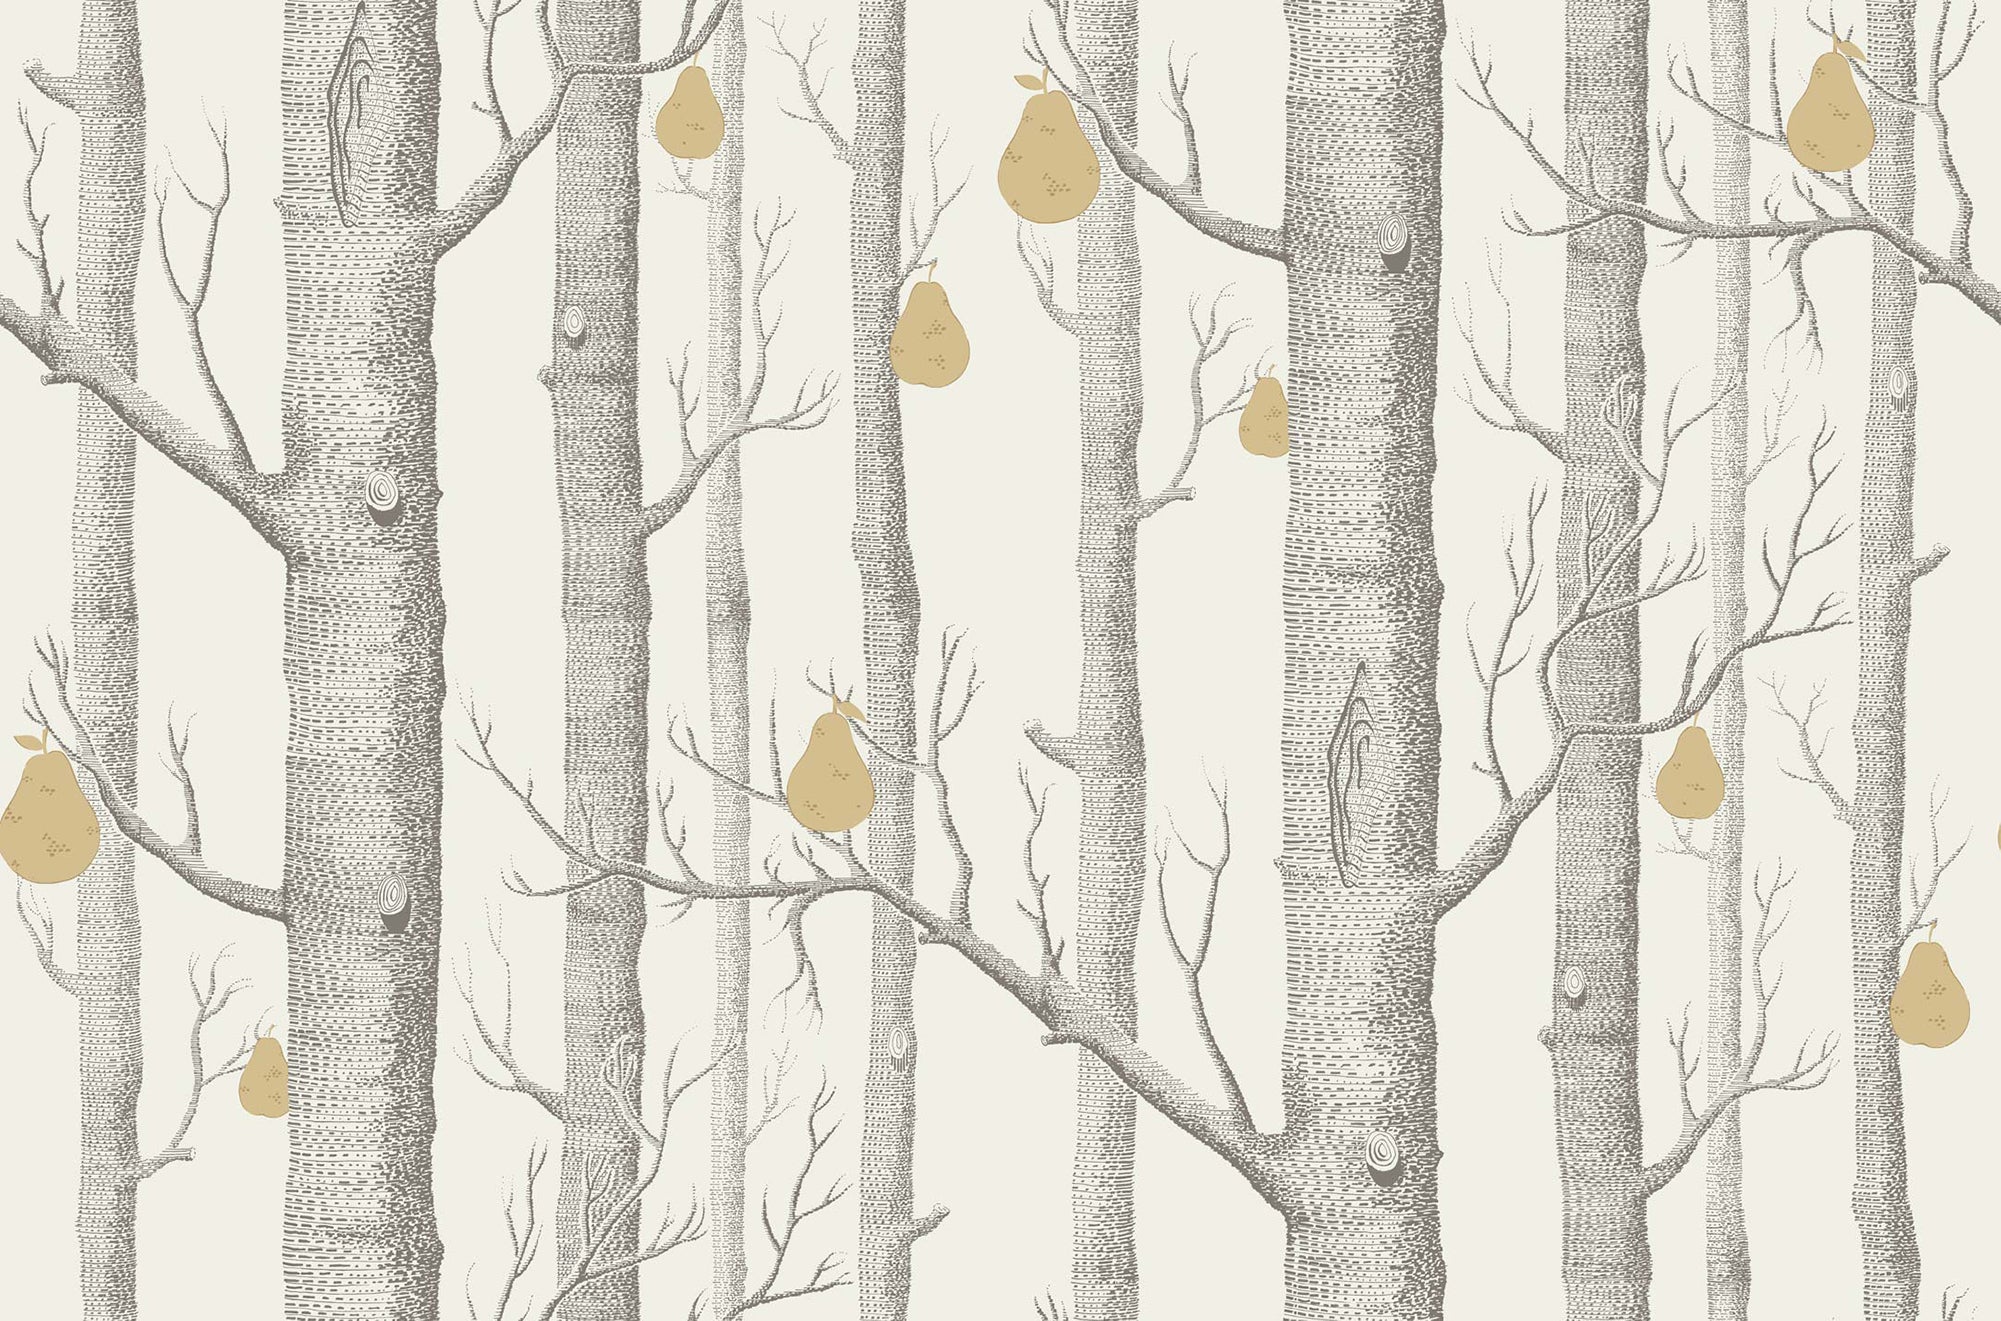 Woods & Pears - Soot & Gold on Stone